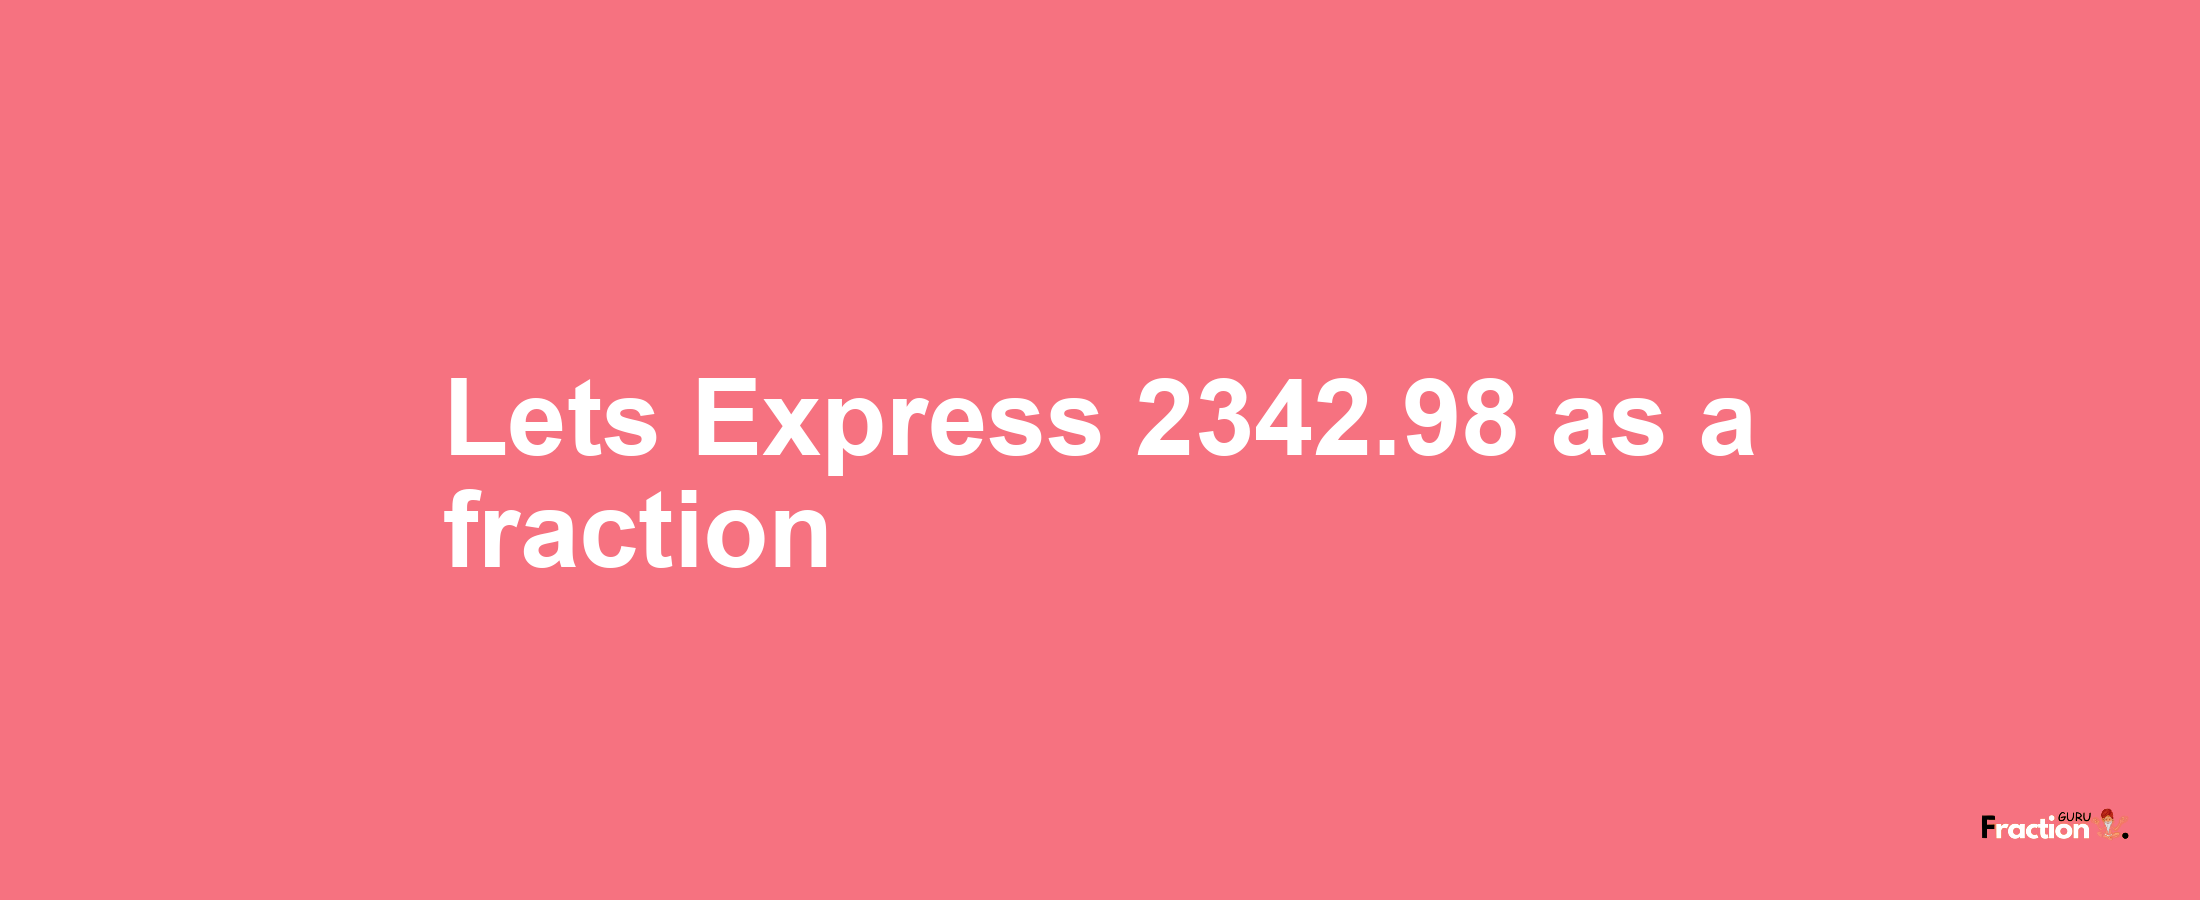 Lets Express 2342.98 as afraction